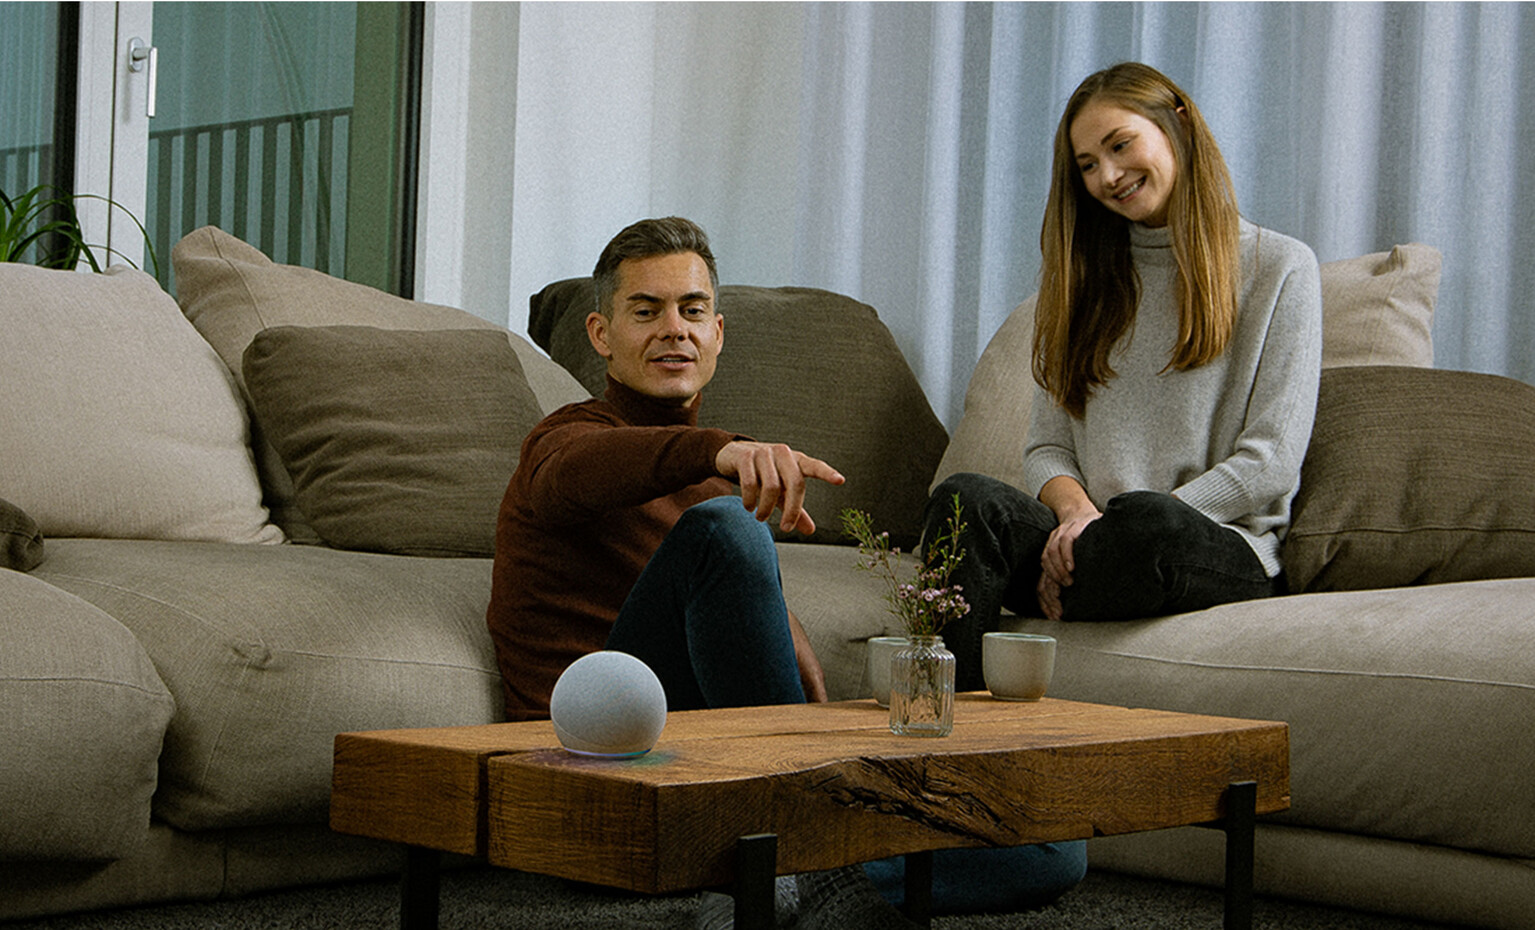 A man and a woman, a seemingly happy couple, are sitting comfortably on their couch in what presumably is their living room. The man is pointing towards something while looking at a Voice Assistent on their couch table, having given it a task probably.